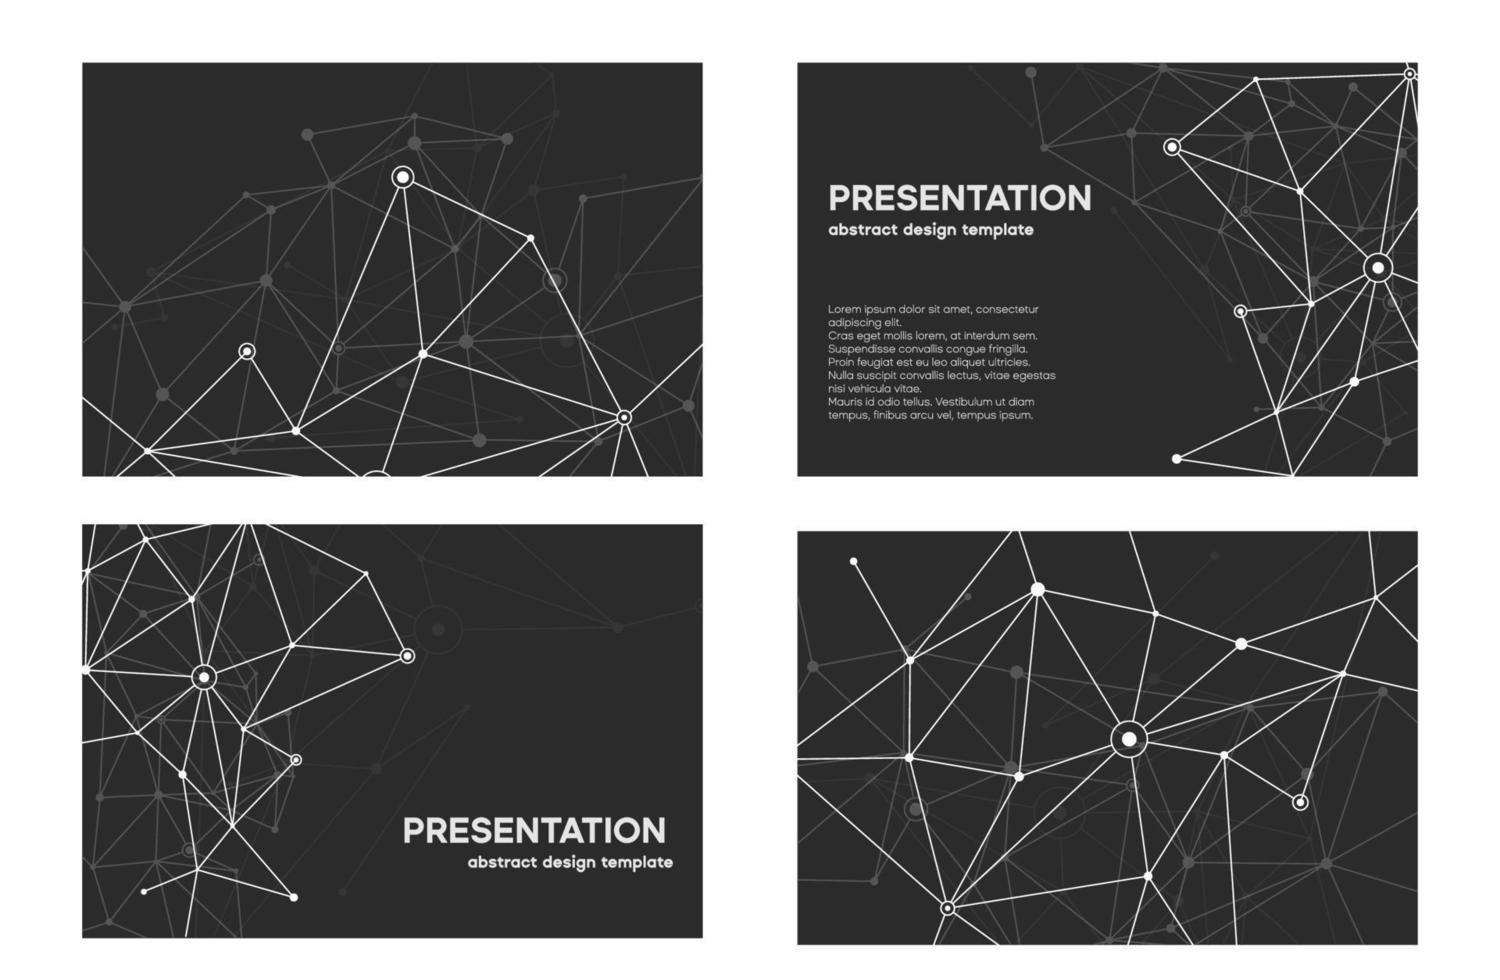 Dark slides layout. Abstract background design. Marketing brand book cover template vector